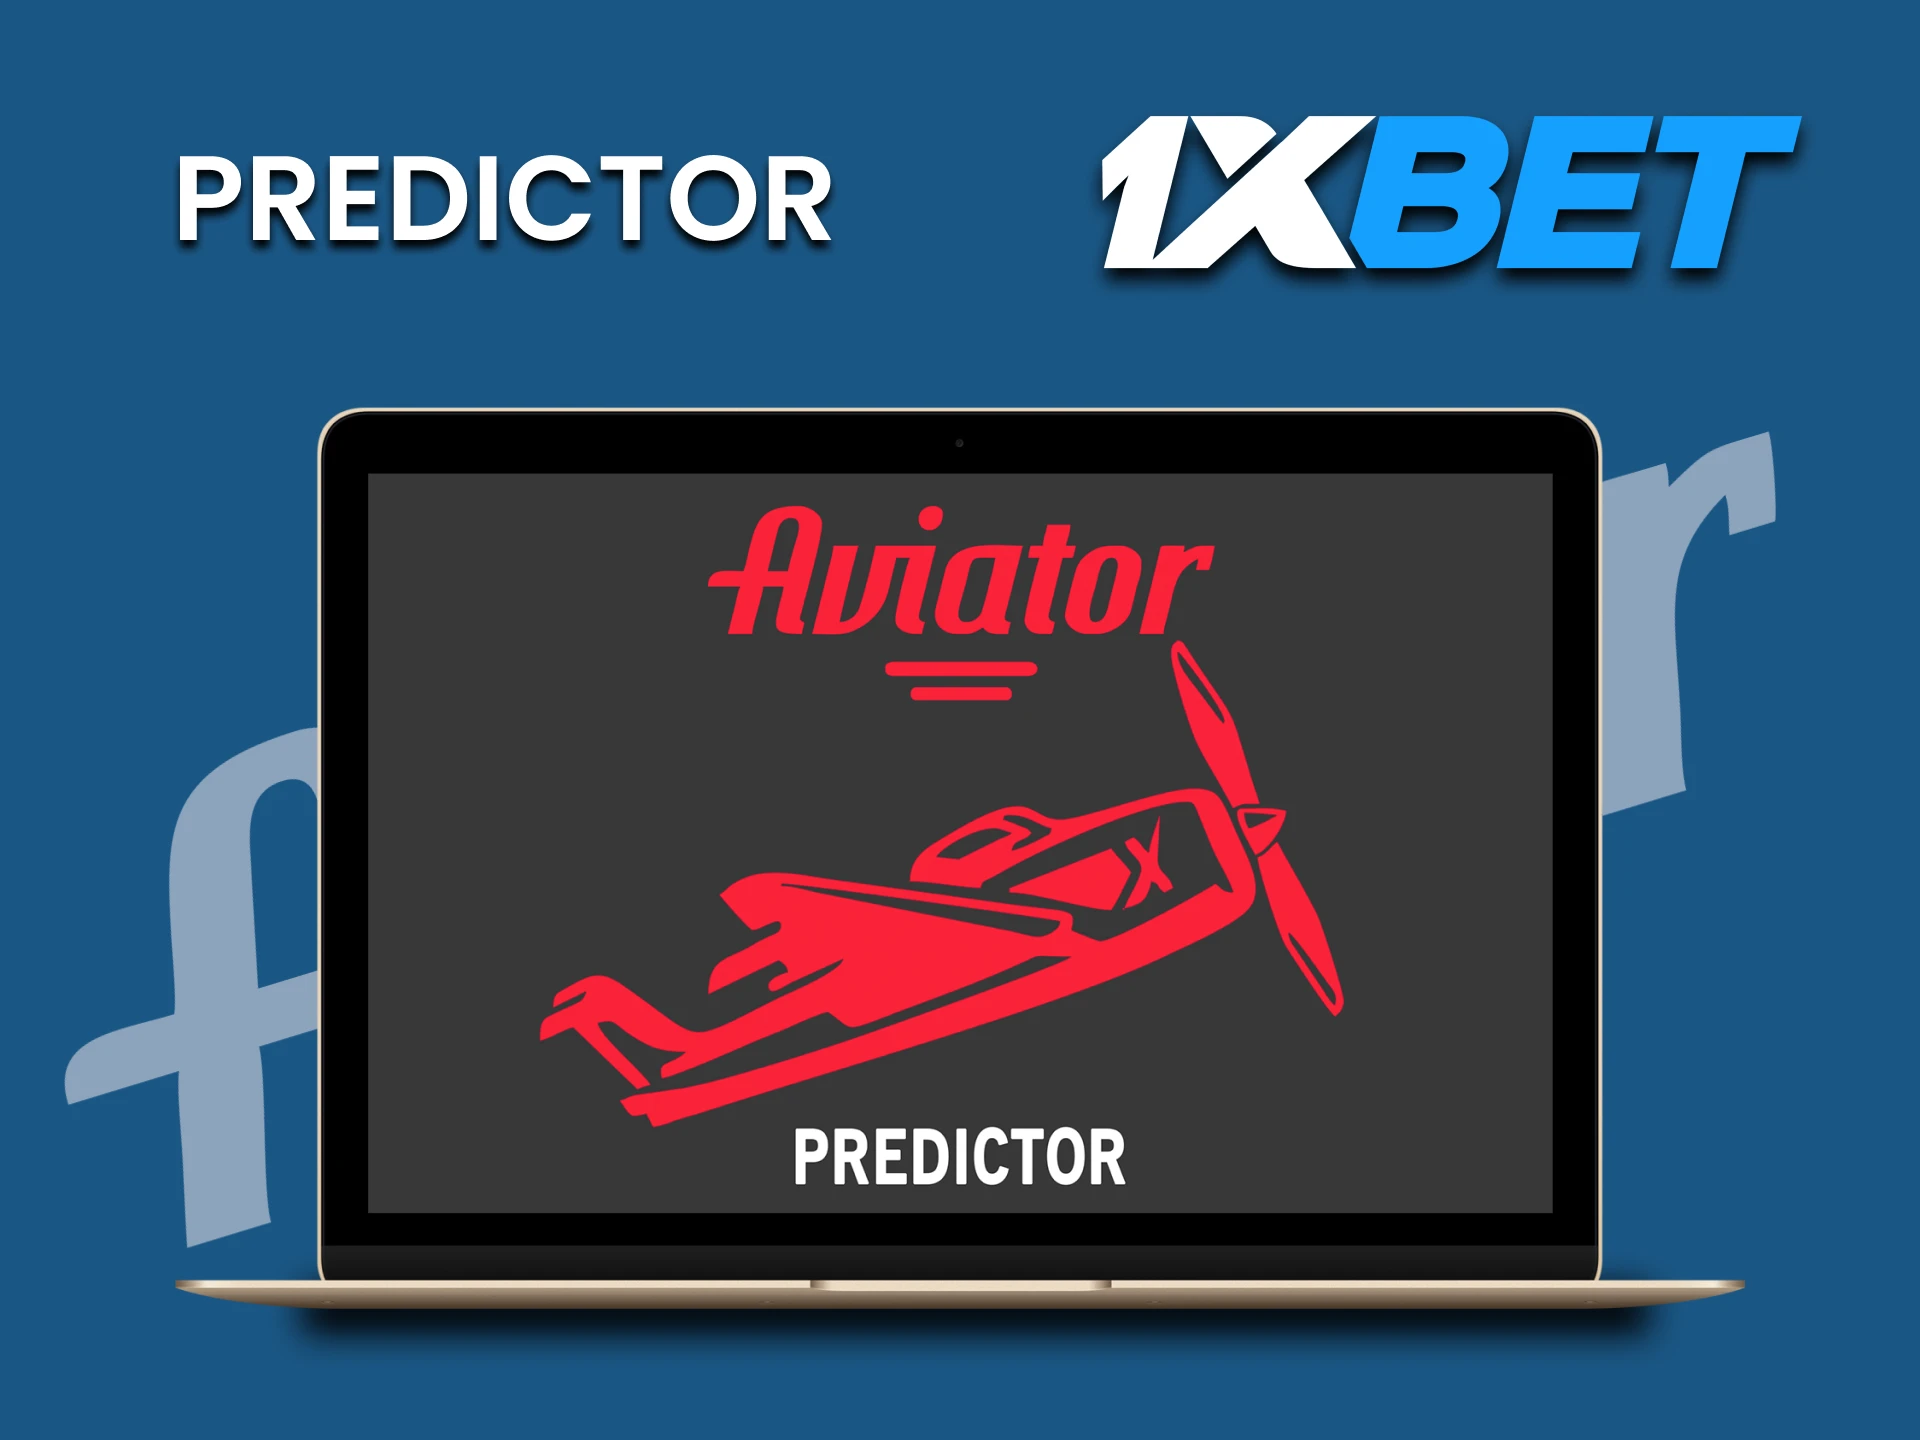 To play Aviator, there are various software on the 1xbet website.